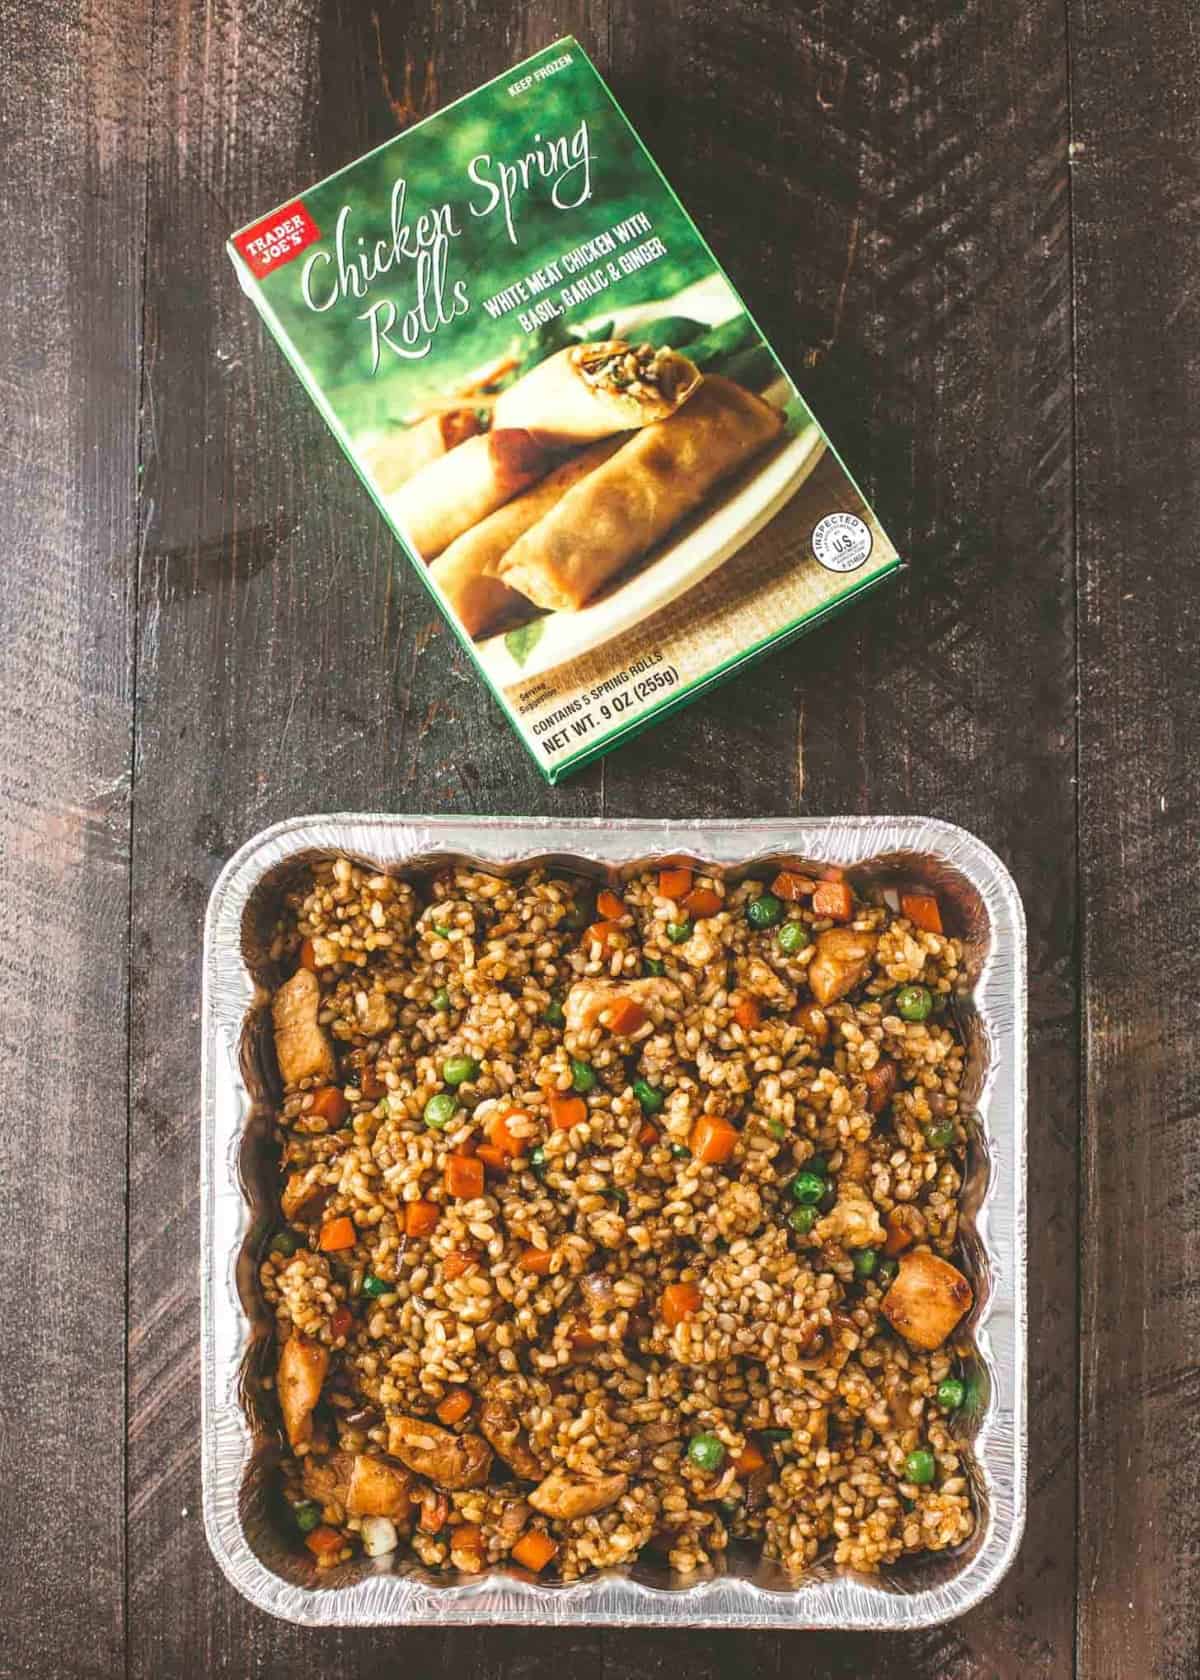 Honey Garlic Chicken Fried Rice in a foil container